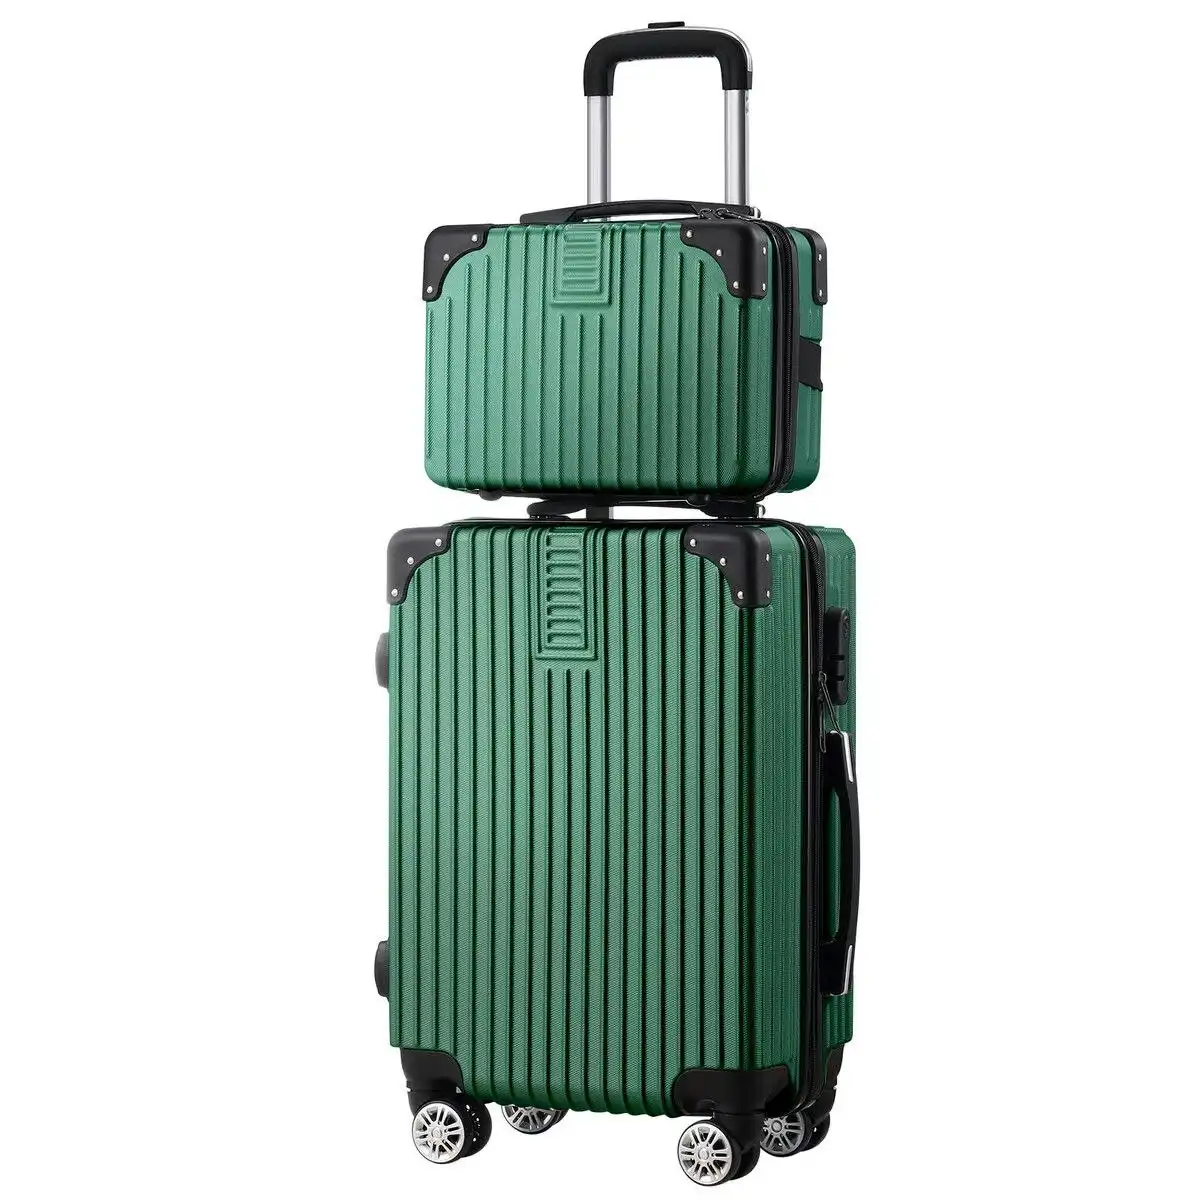 Buon Viaggio 2 Piece Luggage Set Travel Suitcases Carry On Hard Shell Lightweight Rolling Traveller Trolley Vanity Checked Bag